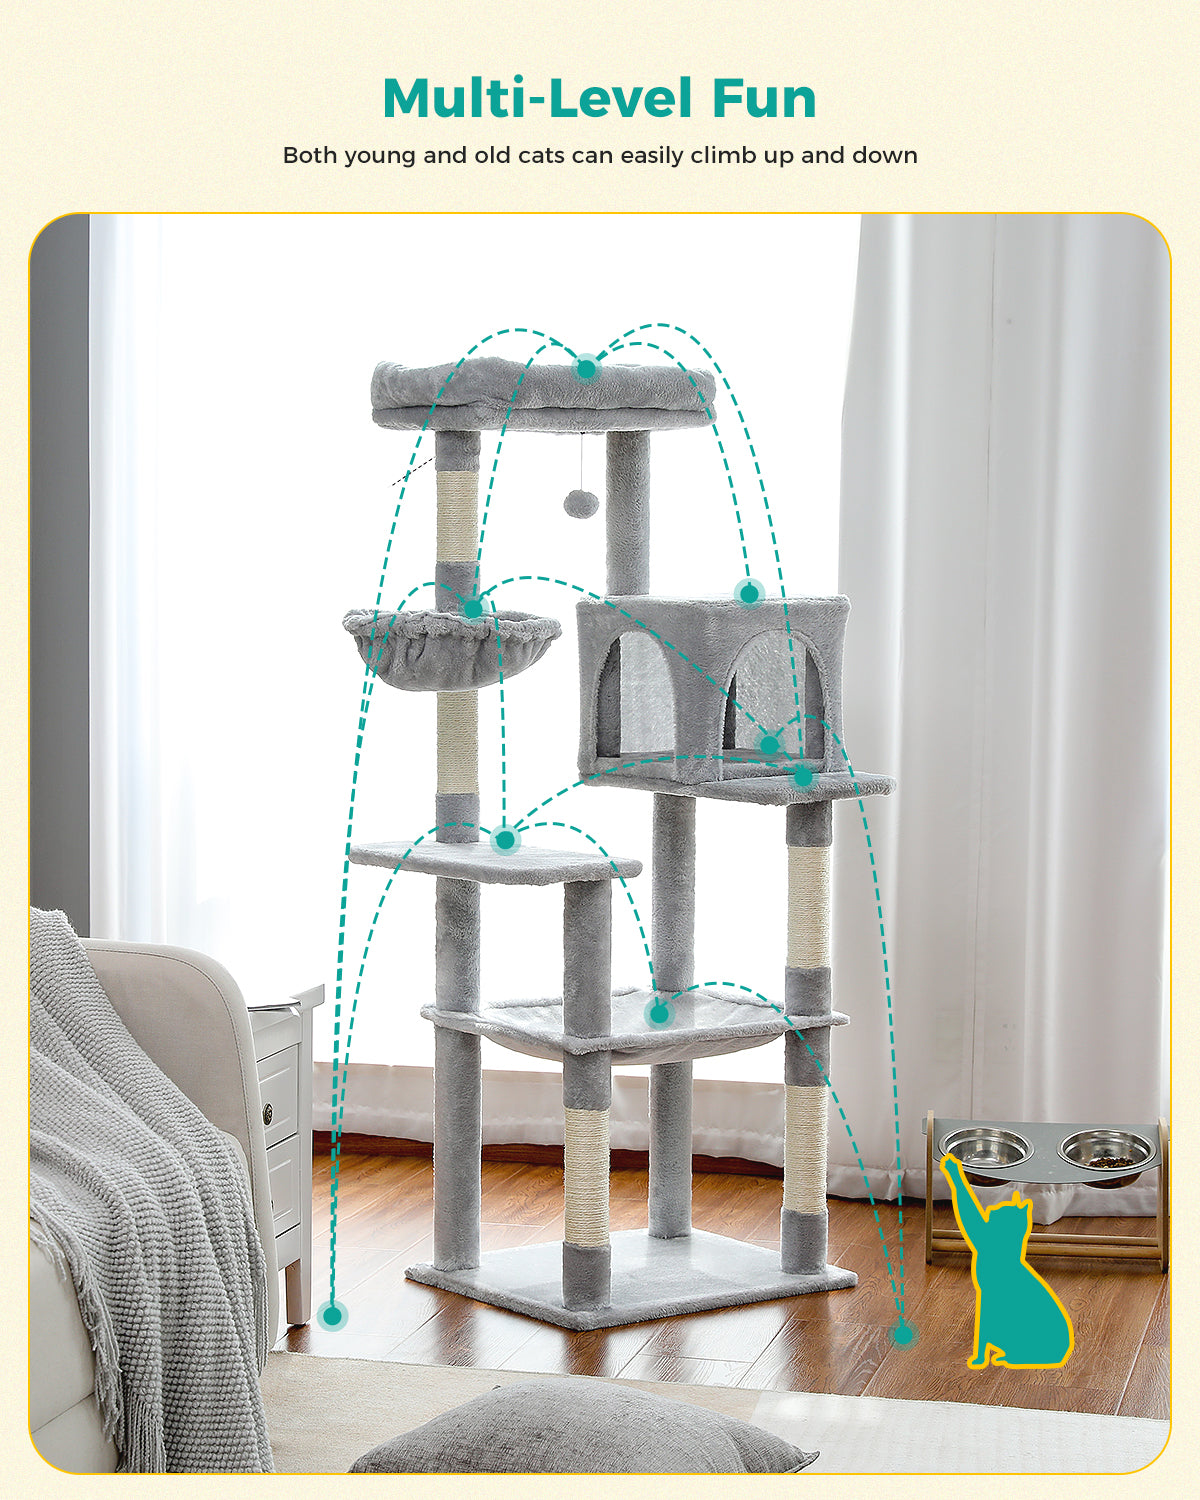 PAWZ Road Cat Tree Scratching Post Tower for Large Cats Play House Condos 143cm Grey